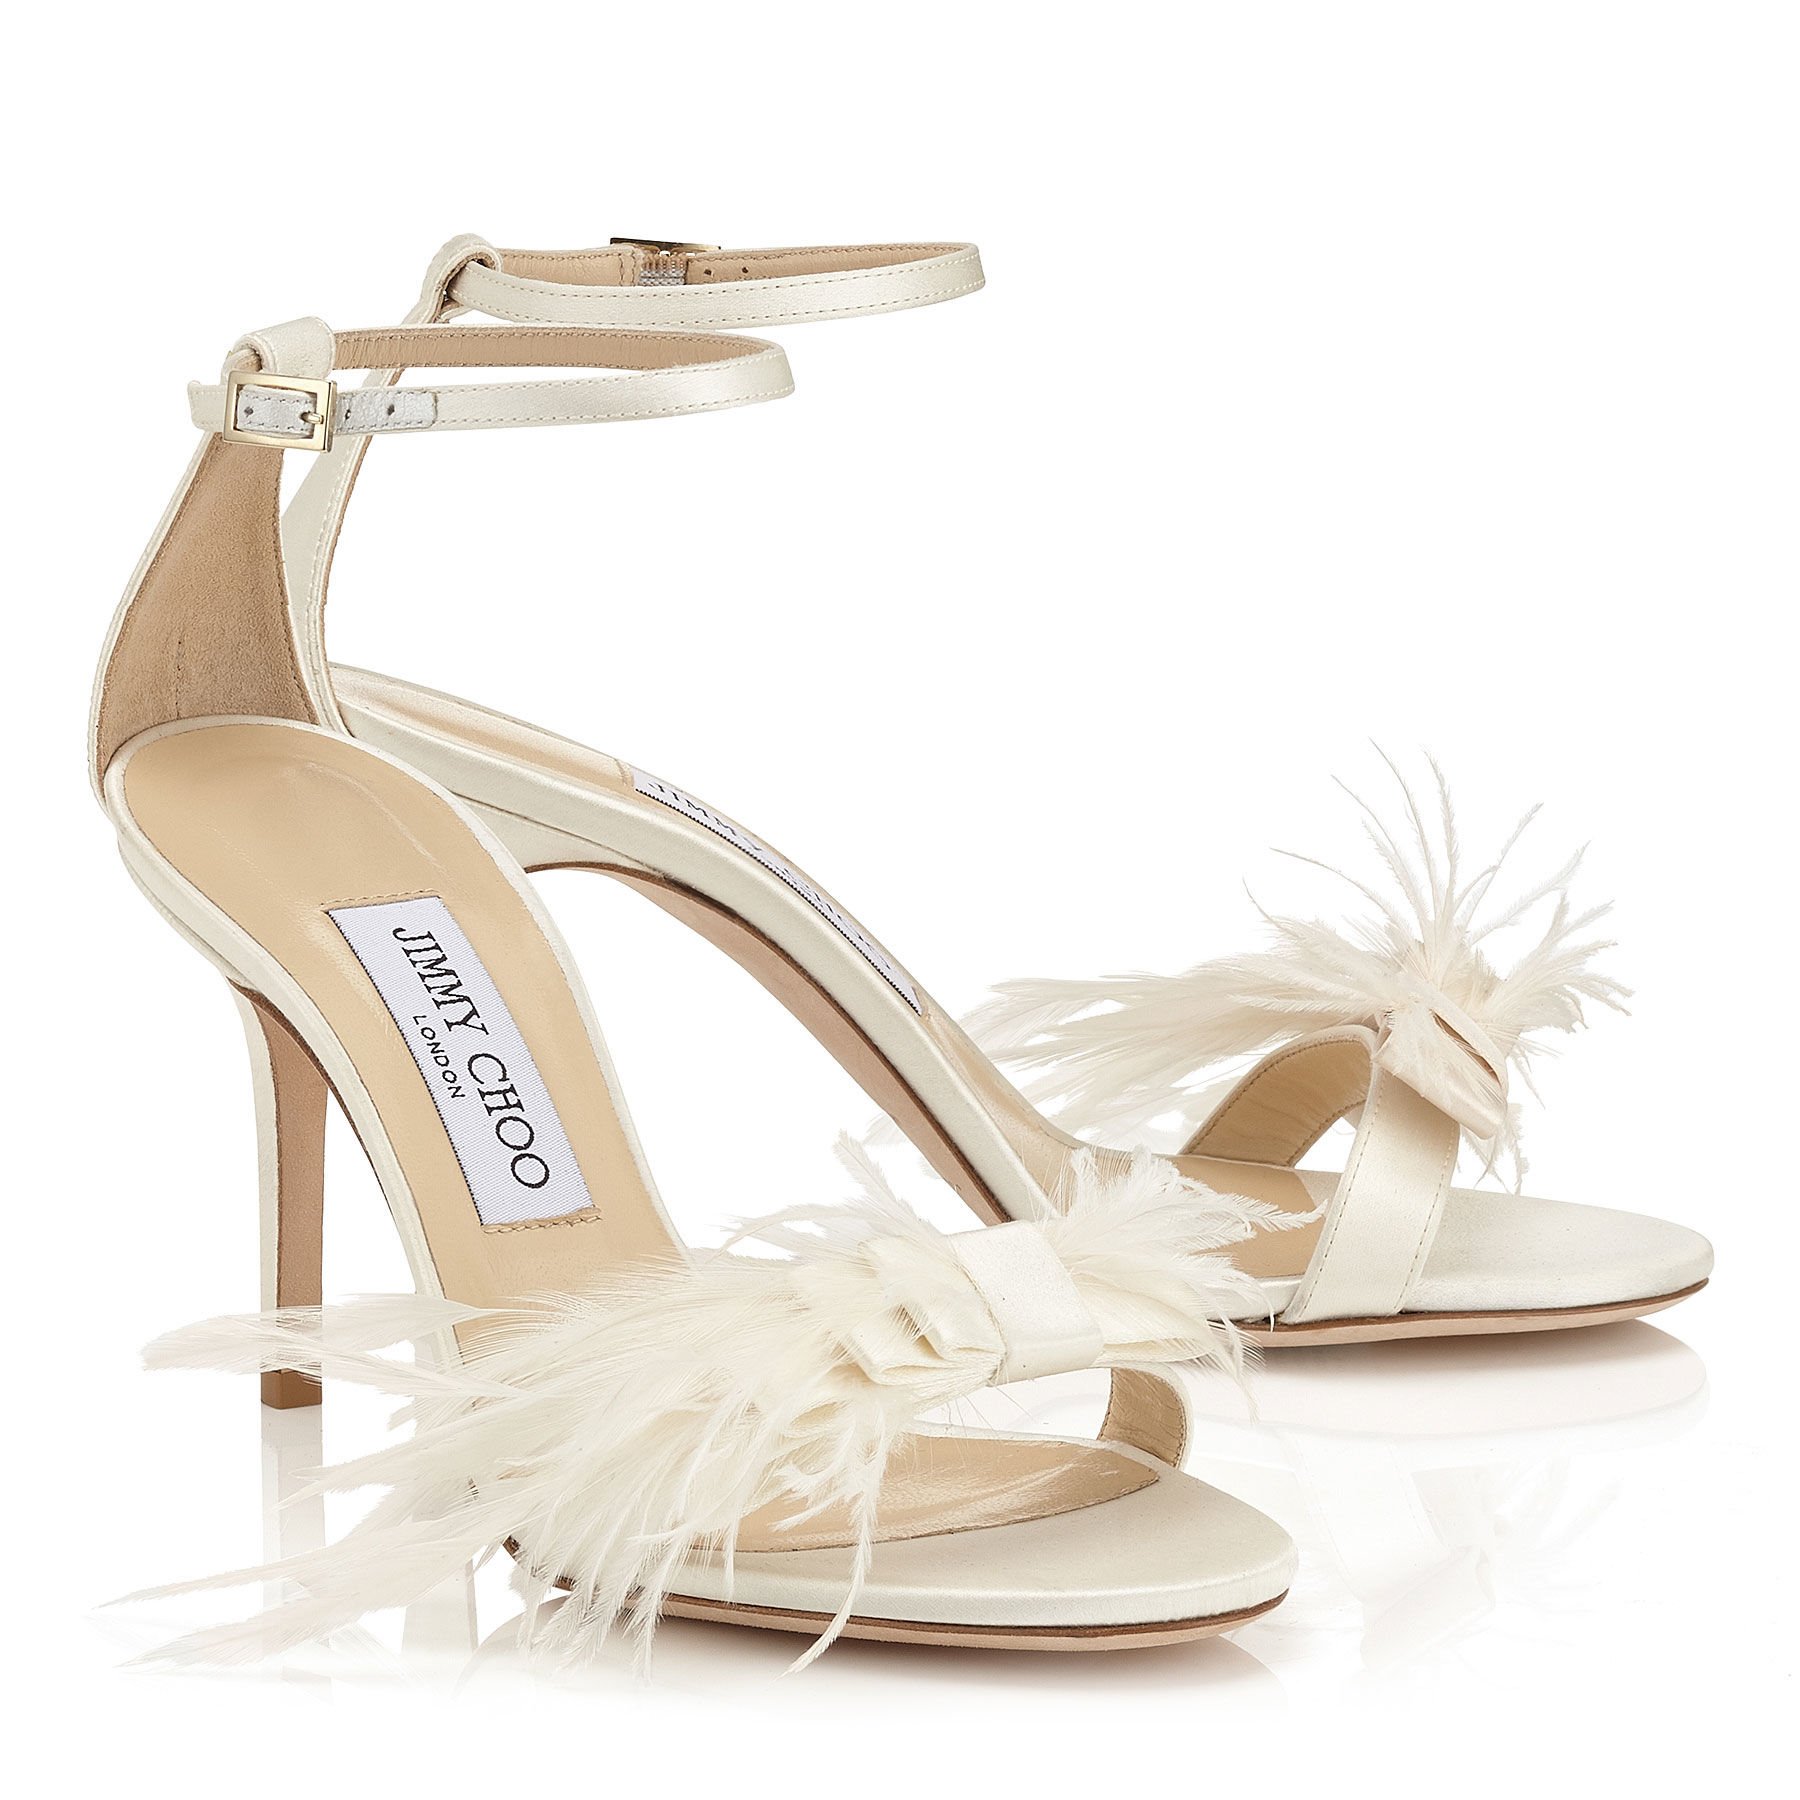 Lyst - Jimmy Choo Vivien 85 Ivory Satin Sandals With Feather Bow in White